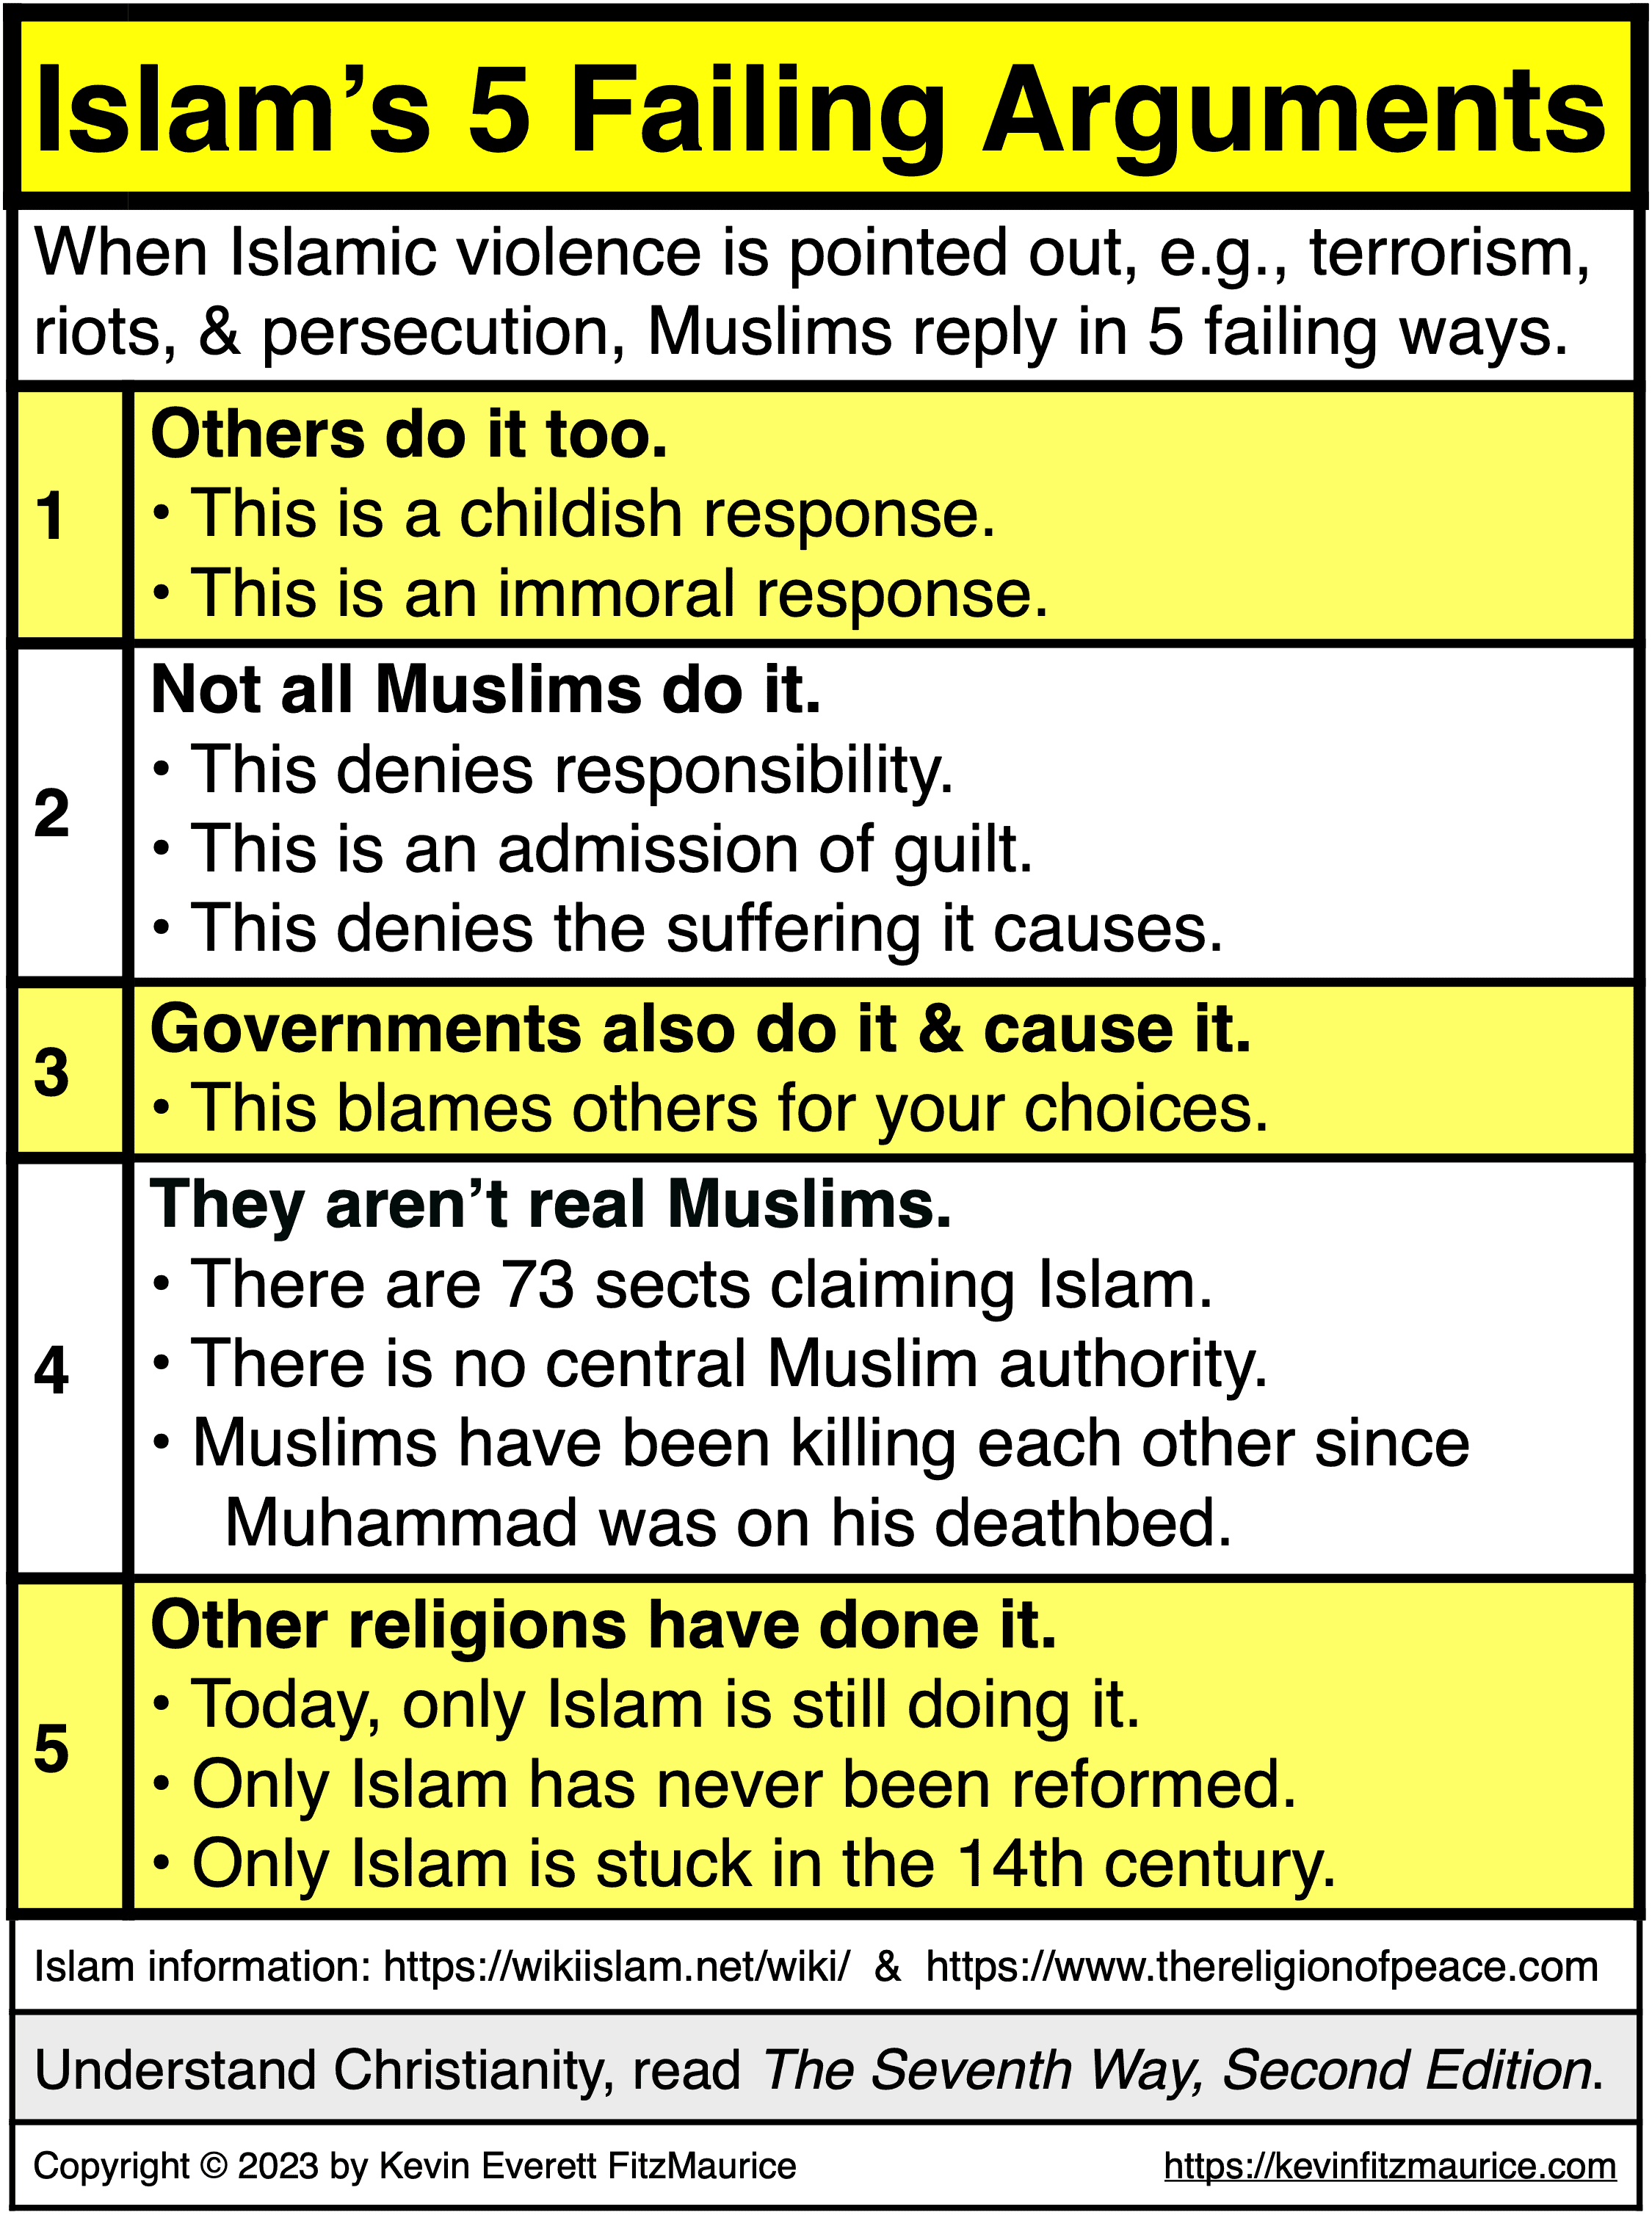 Islam's 5 Failing Arguments to Excuse Muslim Violence